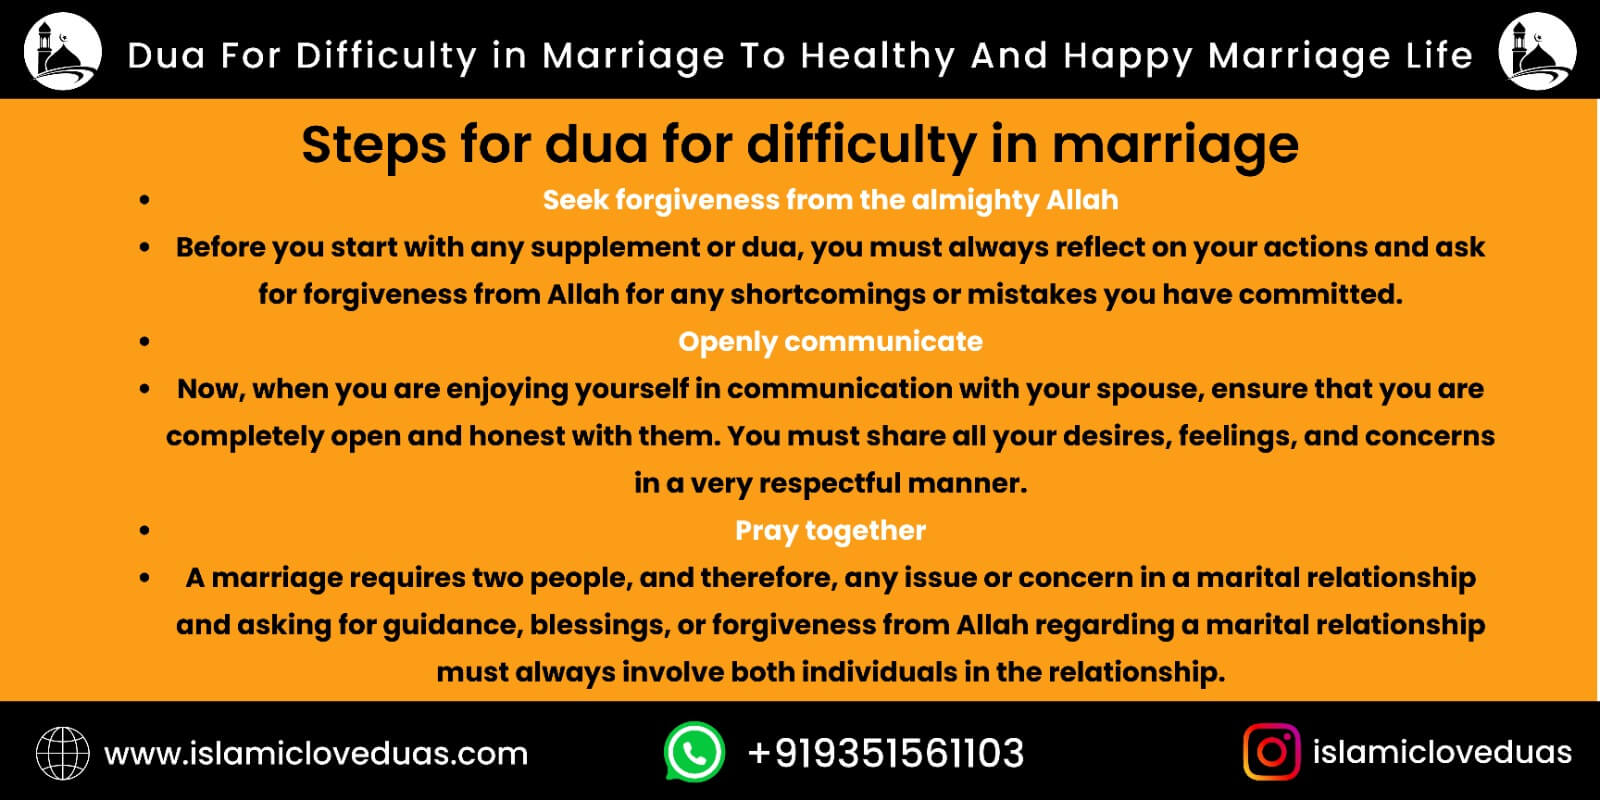 Dua For Difficulty in Marriage